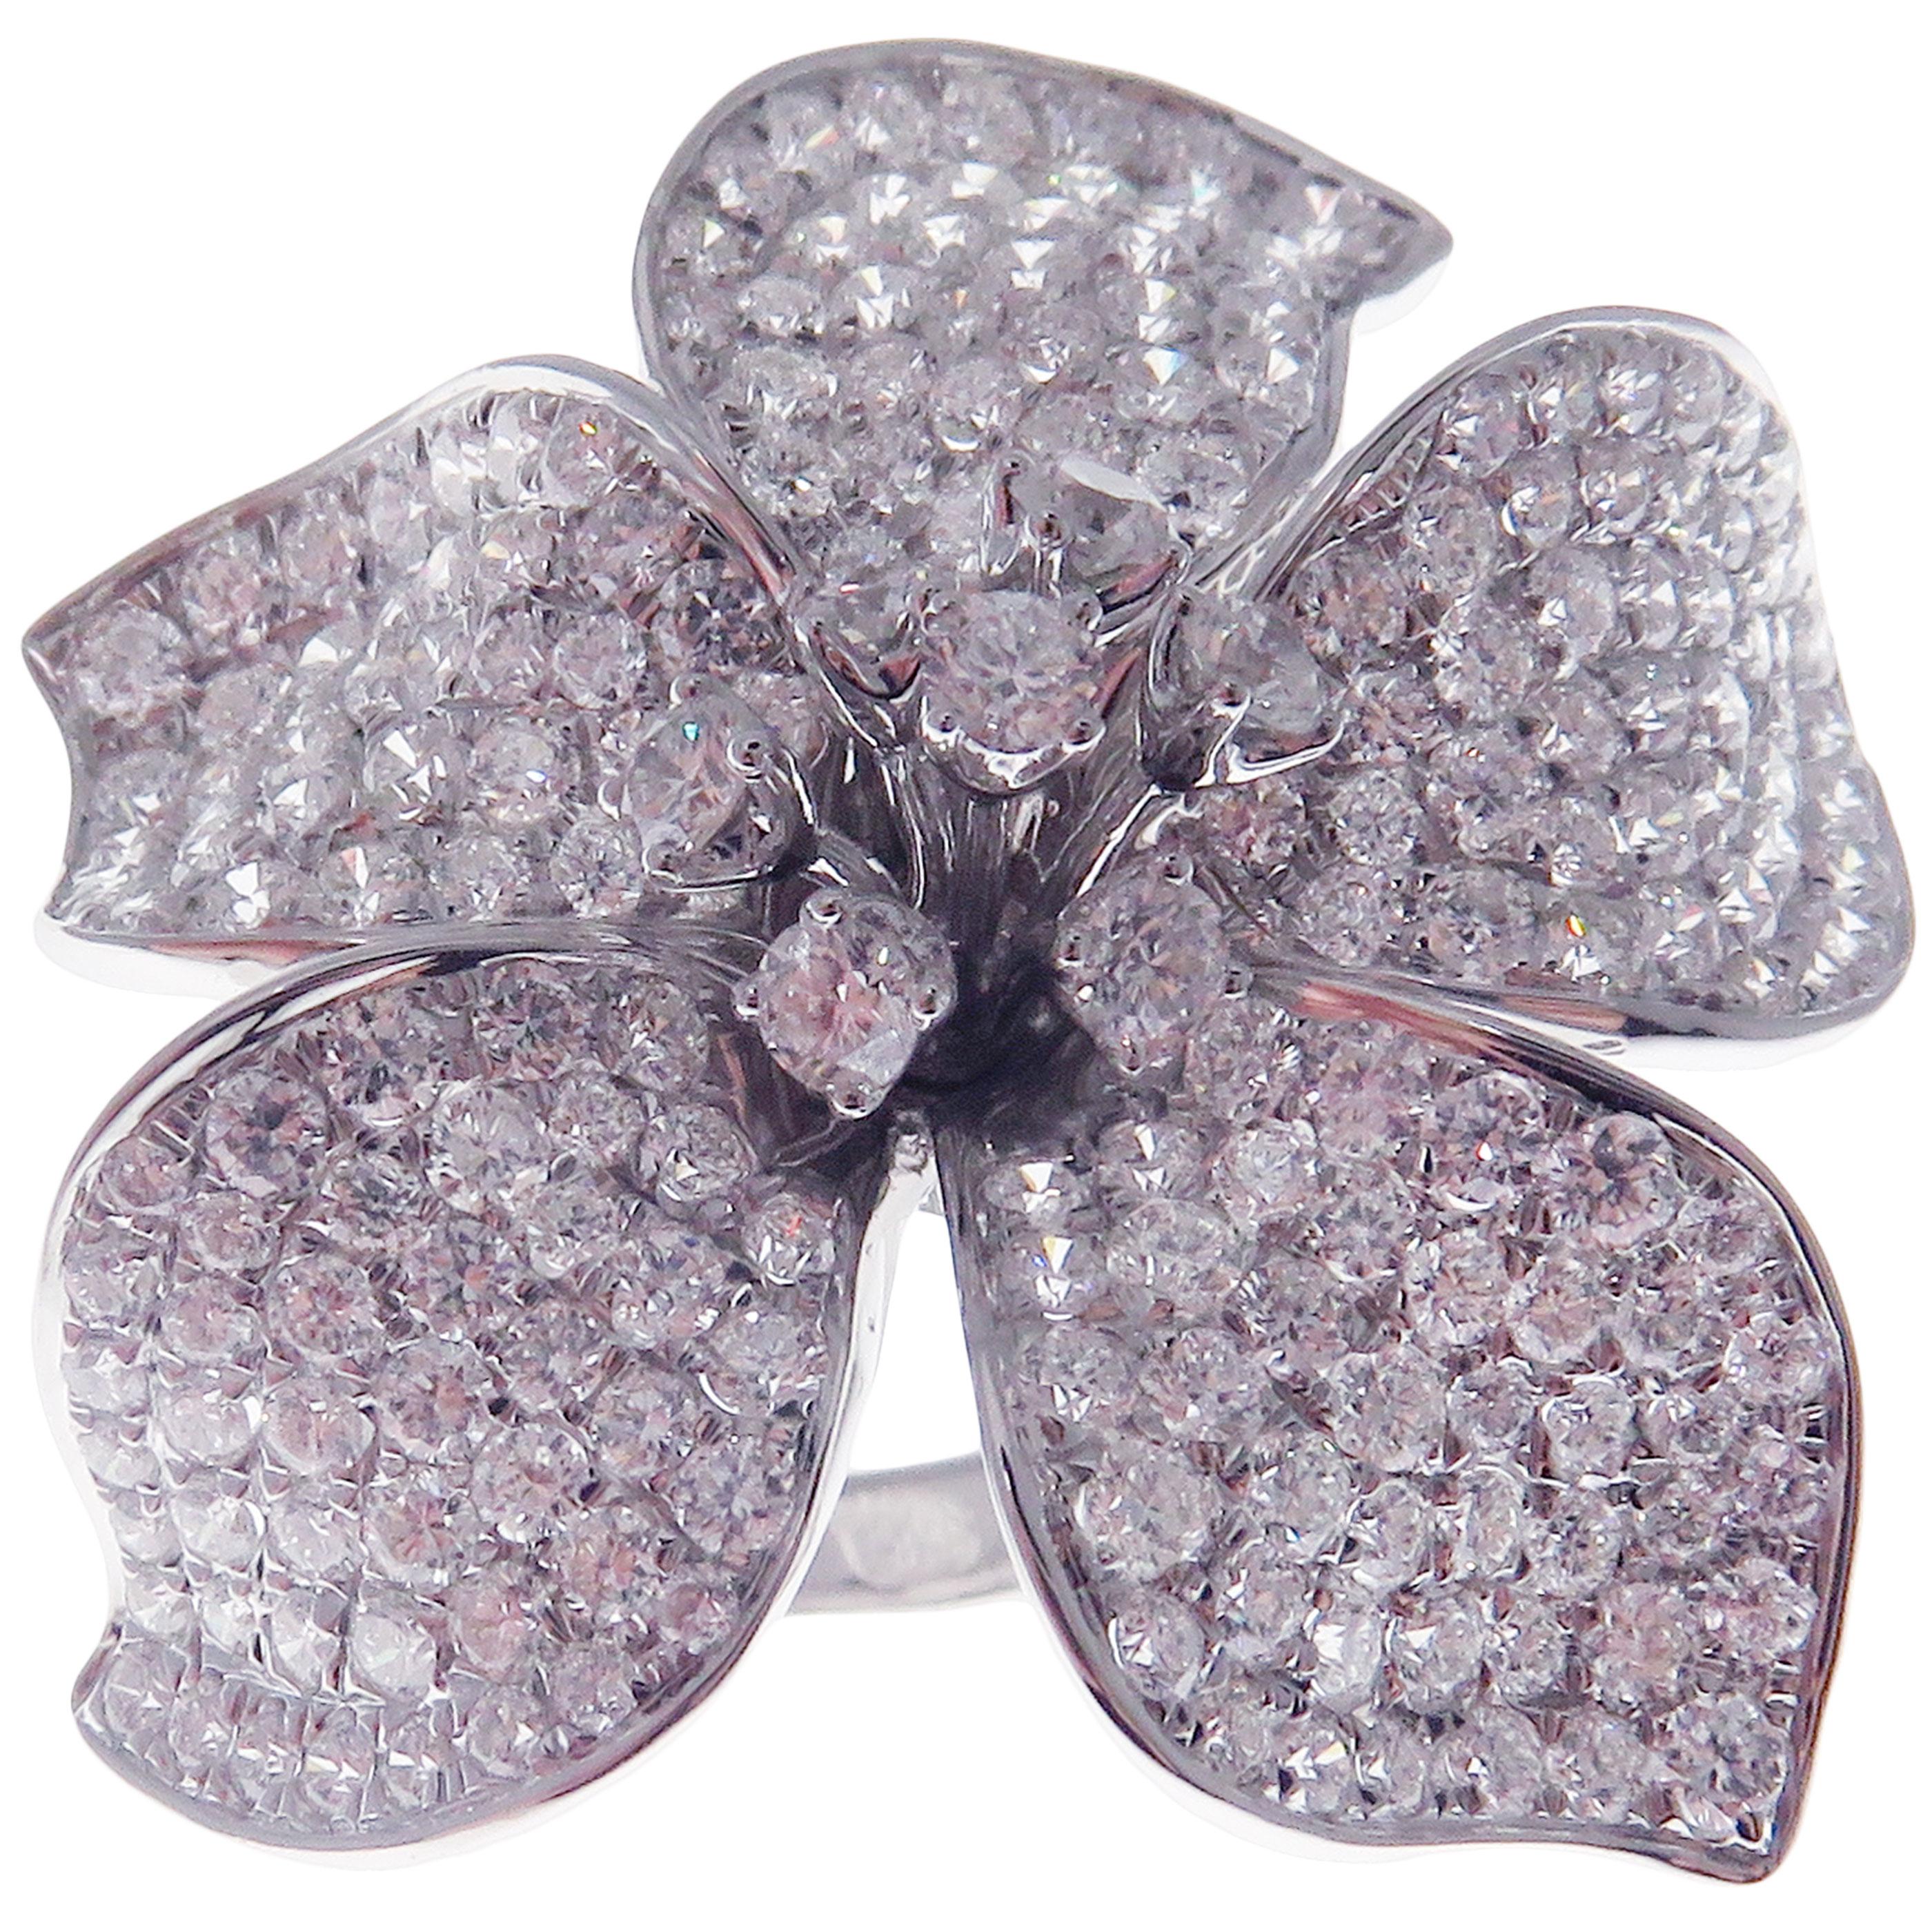 This pave diamond large flower ring is crafted in 18-karat white gold, featuring 218 round white diamonds totaling of 4.75 carats.
Approximate total weight 14.45 grams.
Standard Ring size 7
SI-G Quality natural white diamonds.